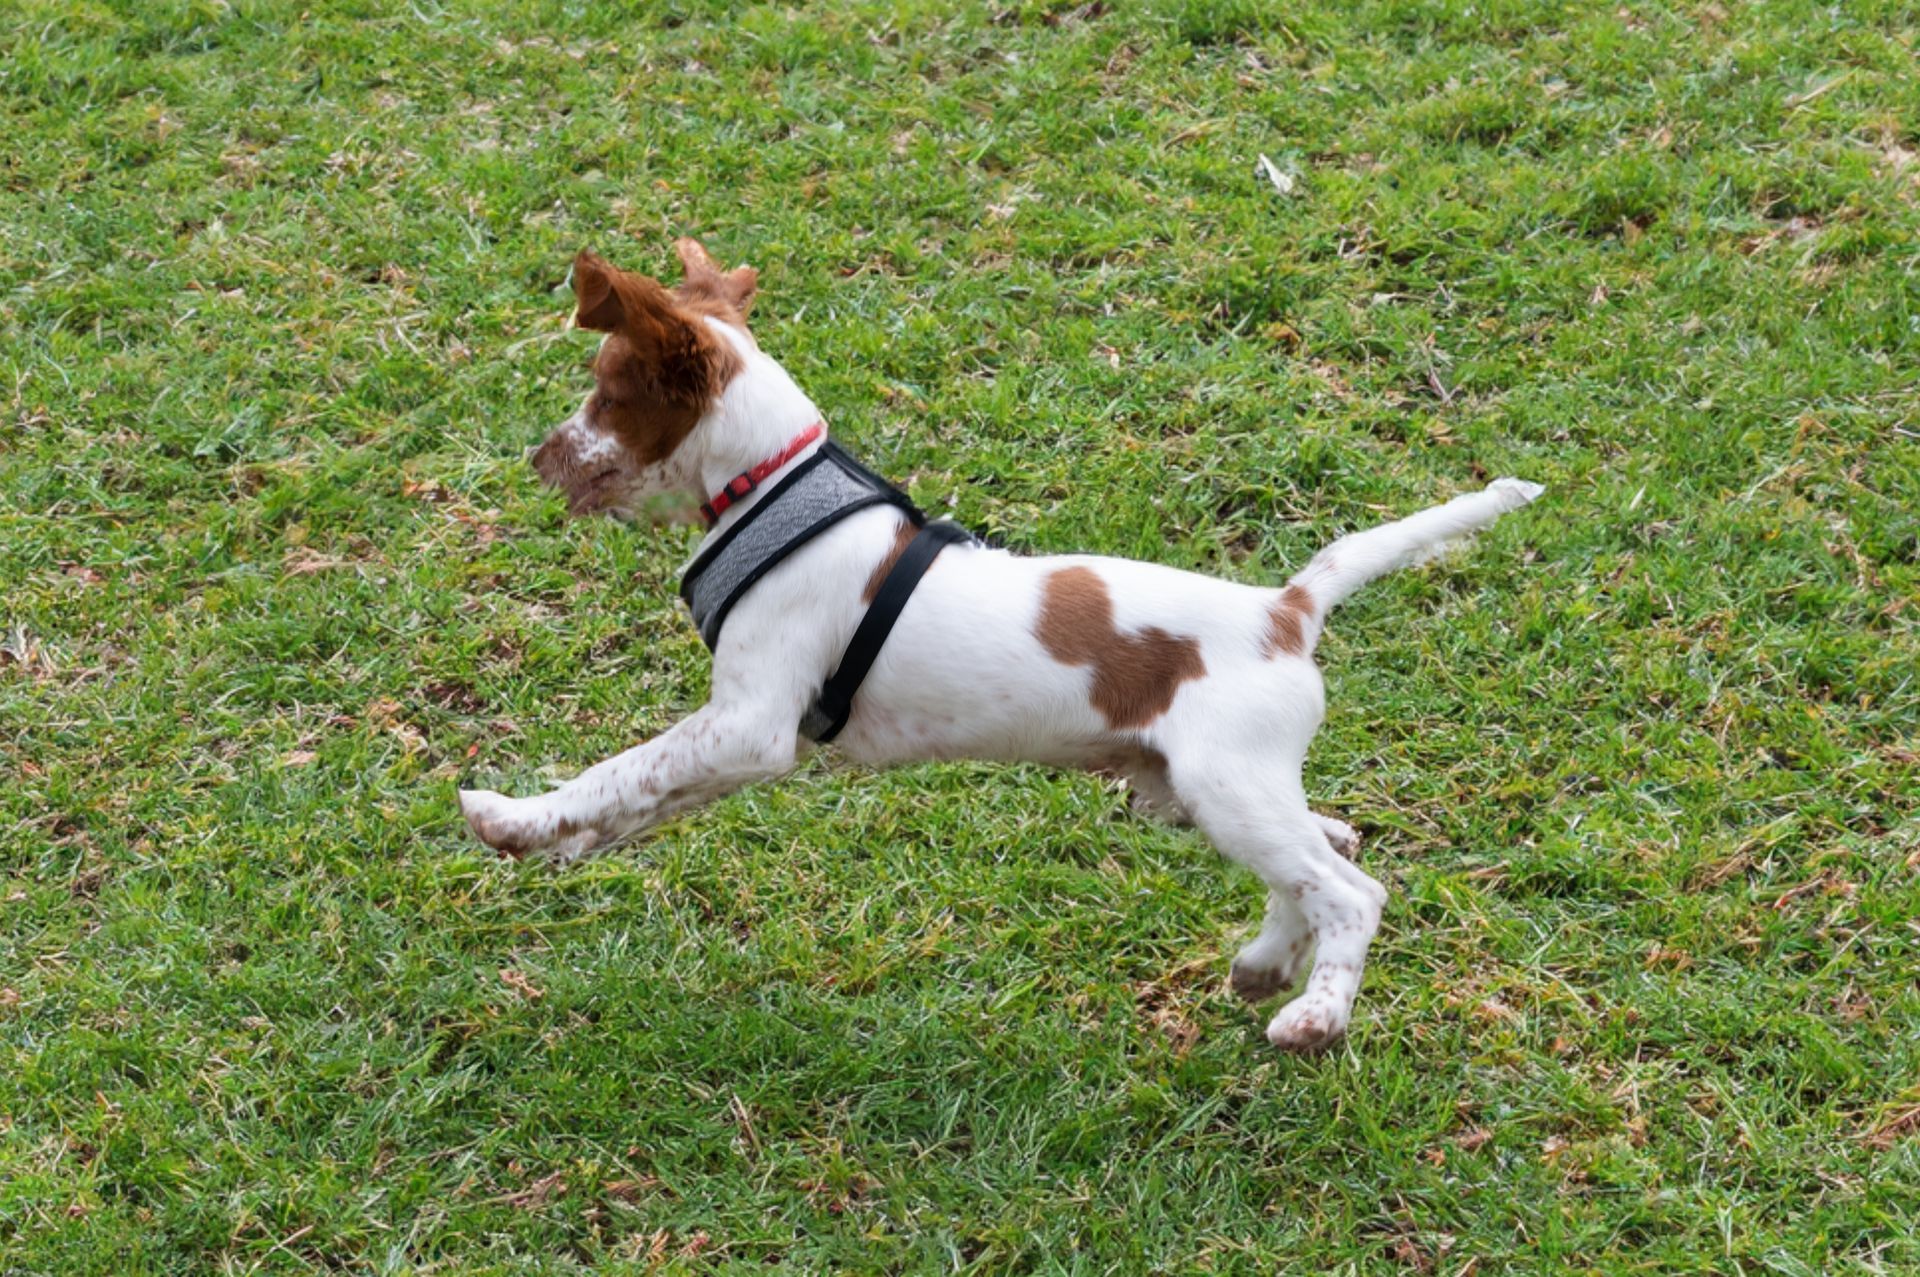 A small brown and white dog wearing a harness is running through a grassy field.